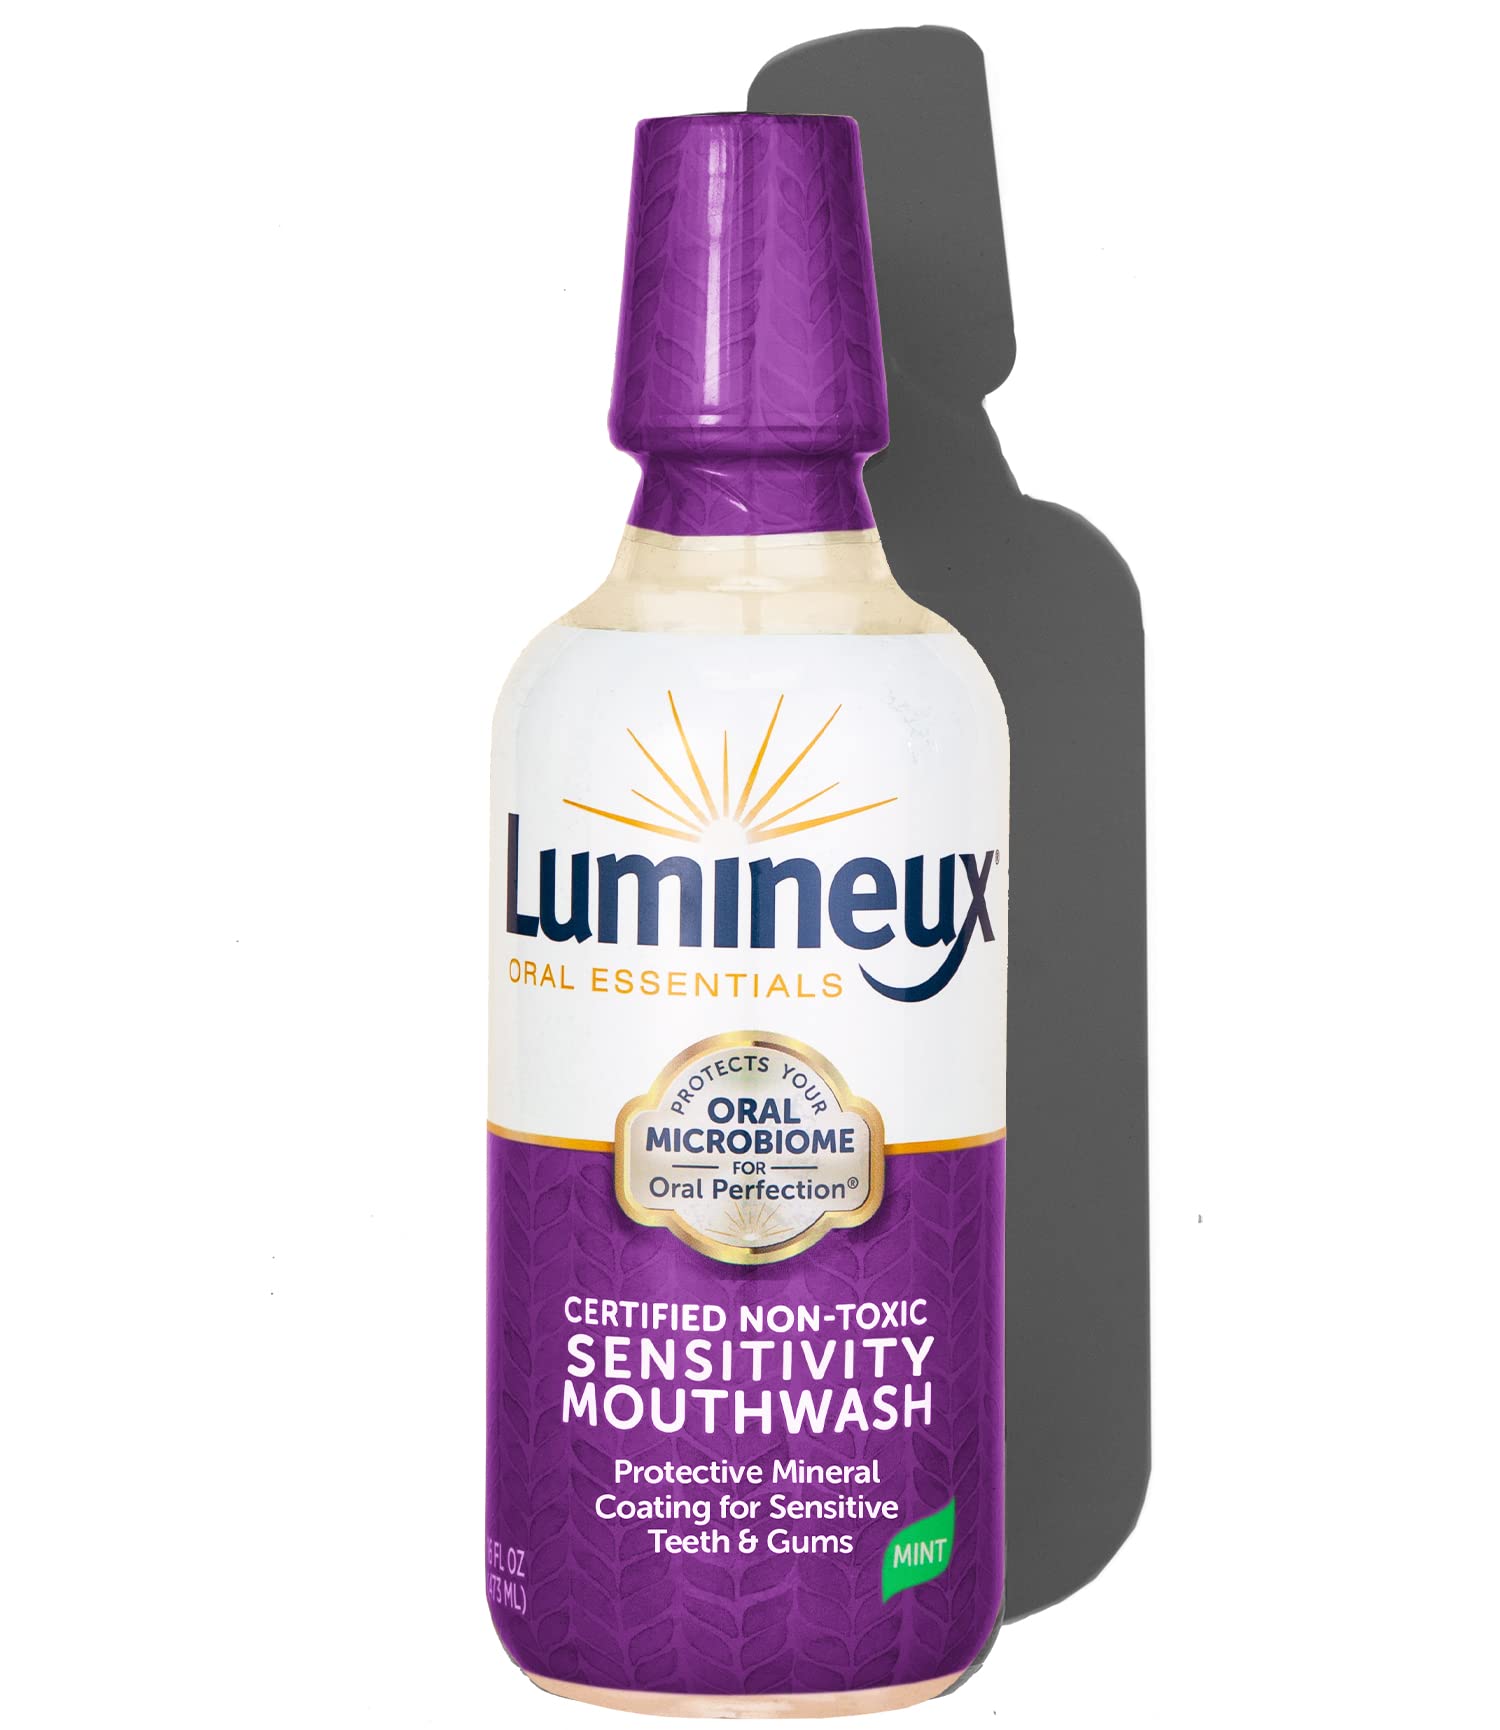 Book Cover Lumineux Sensitivity Mouthwash 16 Oz. - Fluoride Free, Certified Non-Toxic - NO Alcohol, Artificial Colors, SLS Free, & Dentist Formulated